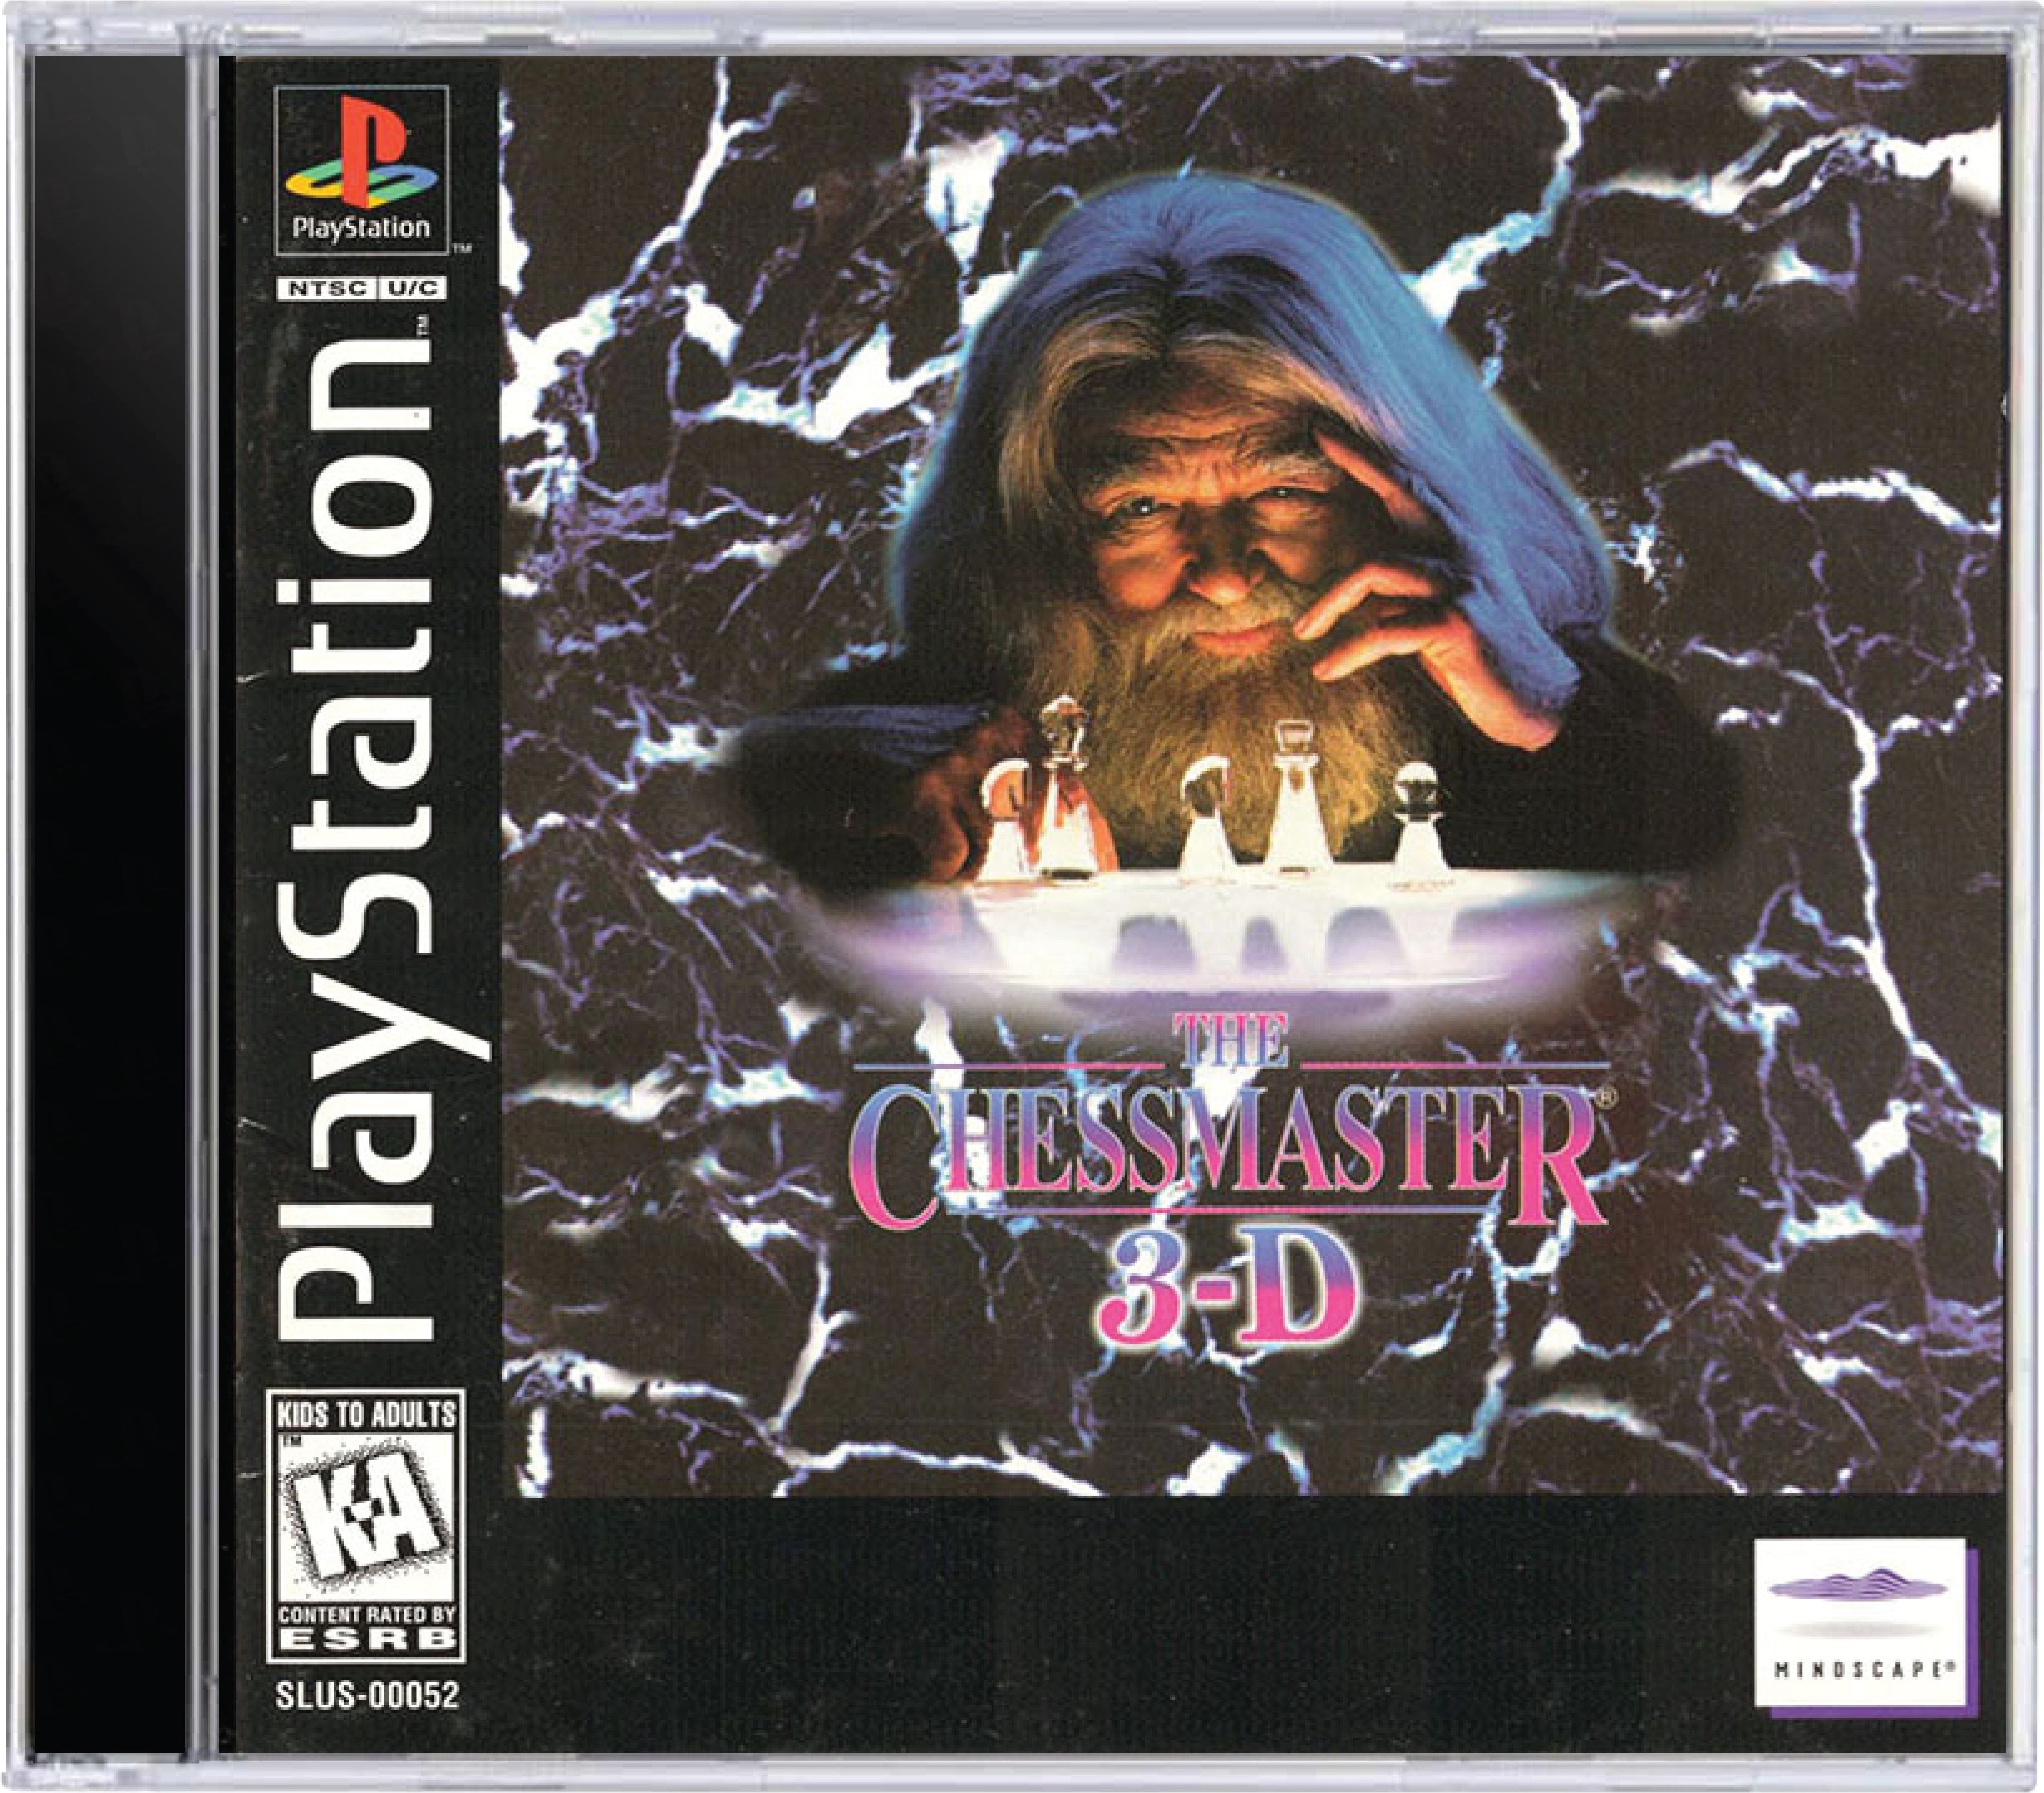 Chessmaster 3D Cover Art and Product Photo